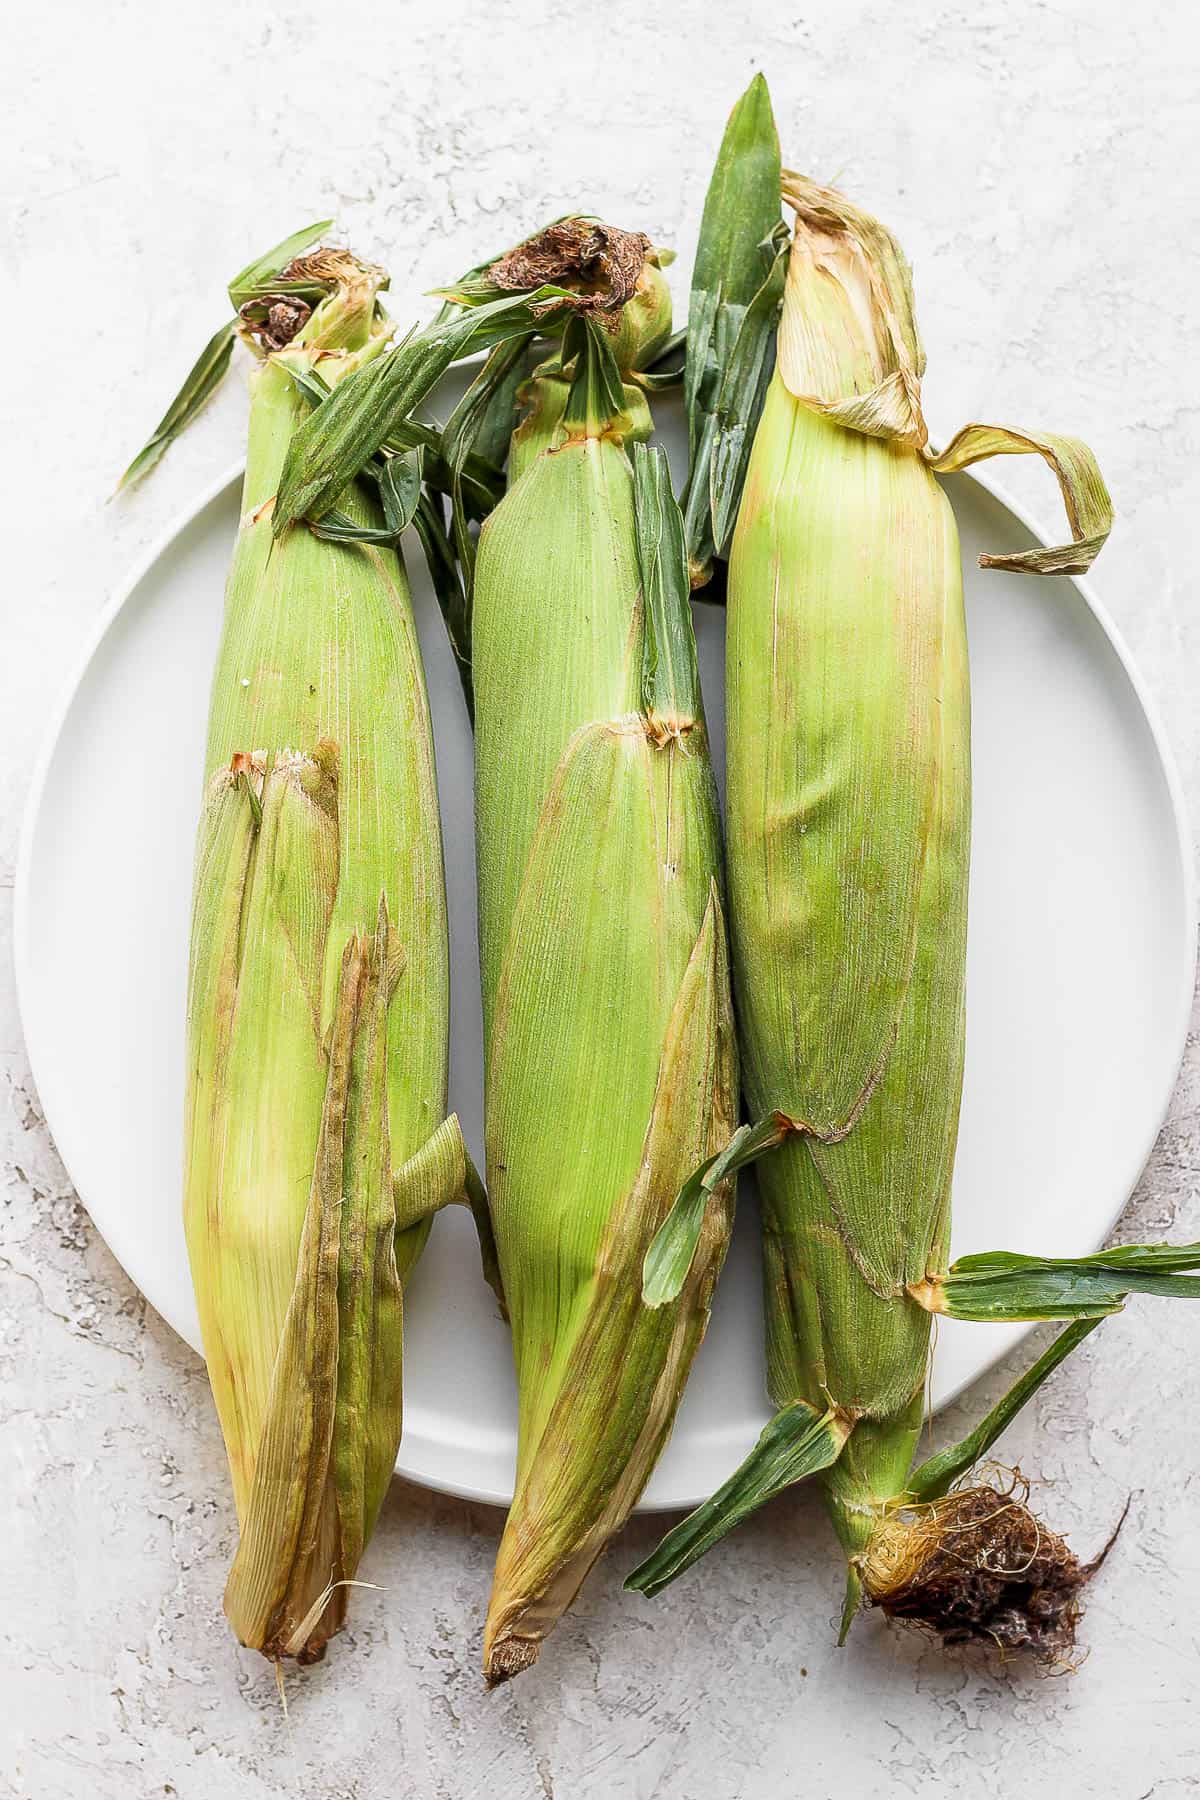 Three pieces of corn with husks on on a plate. 